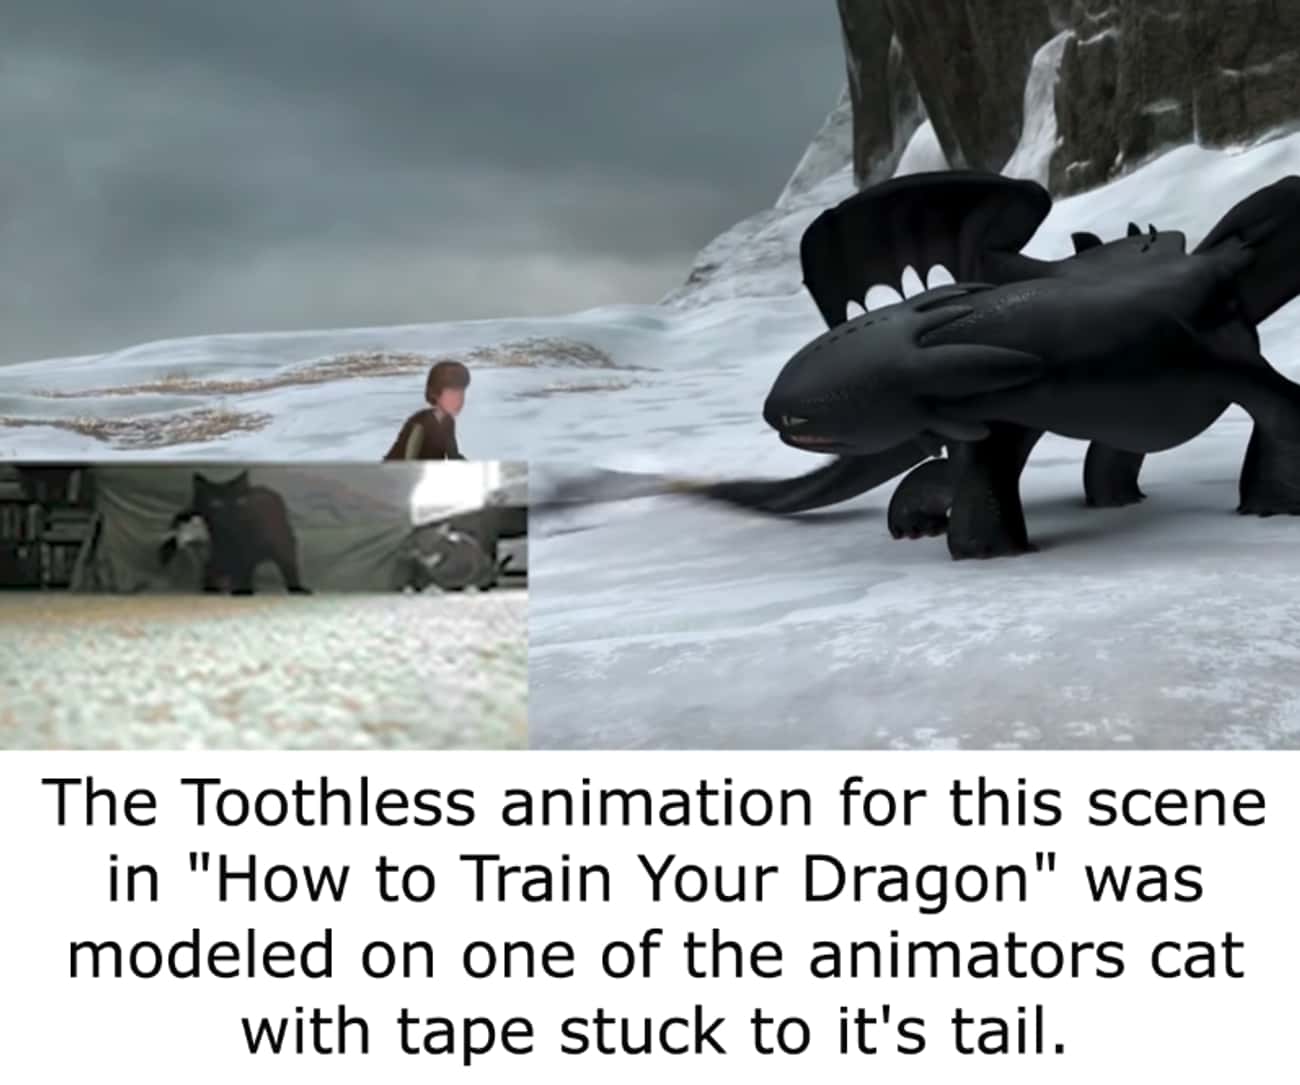 Animation For The Scene With Toothless Having A Problem With His Tail Is Modeled After One Of The Animators Cats